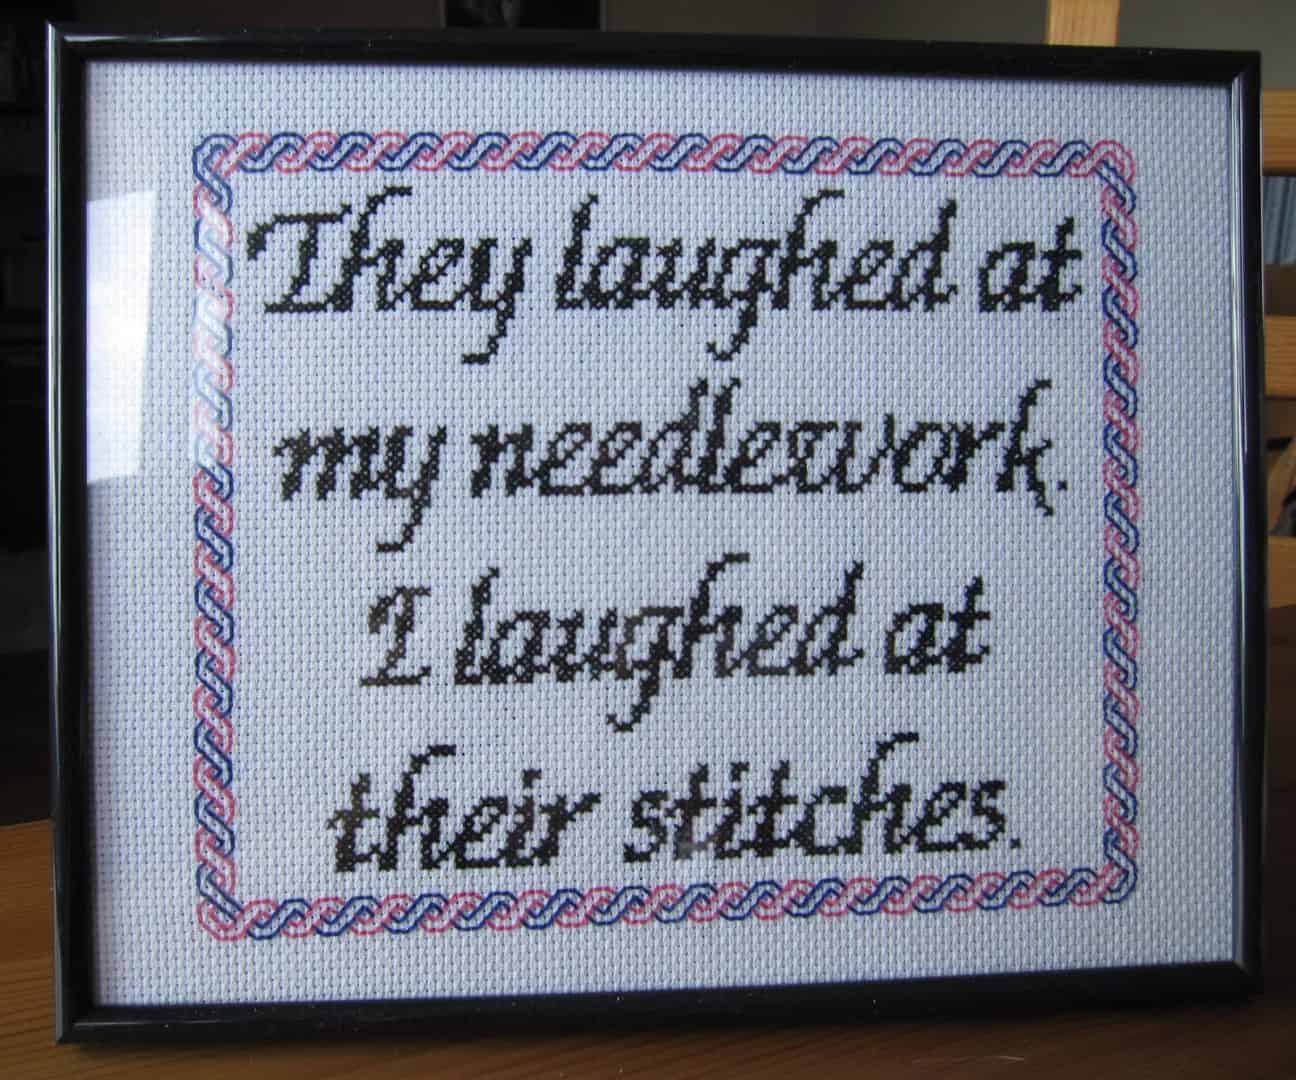 They laughed at my needlework